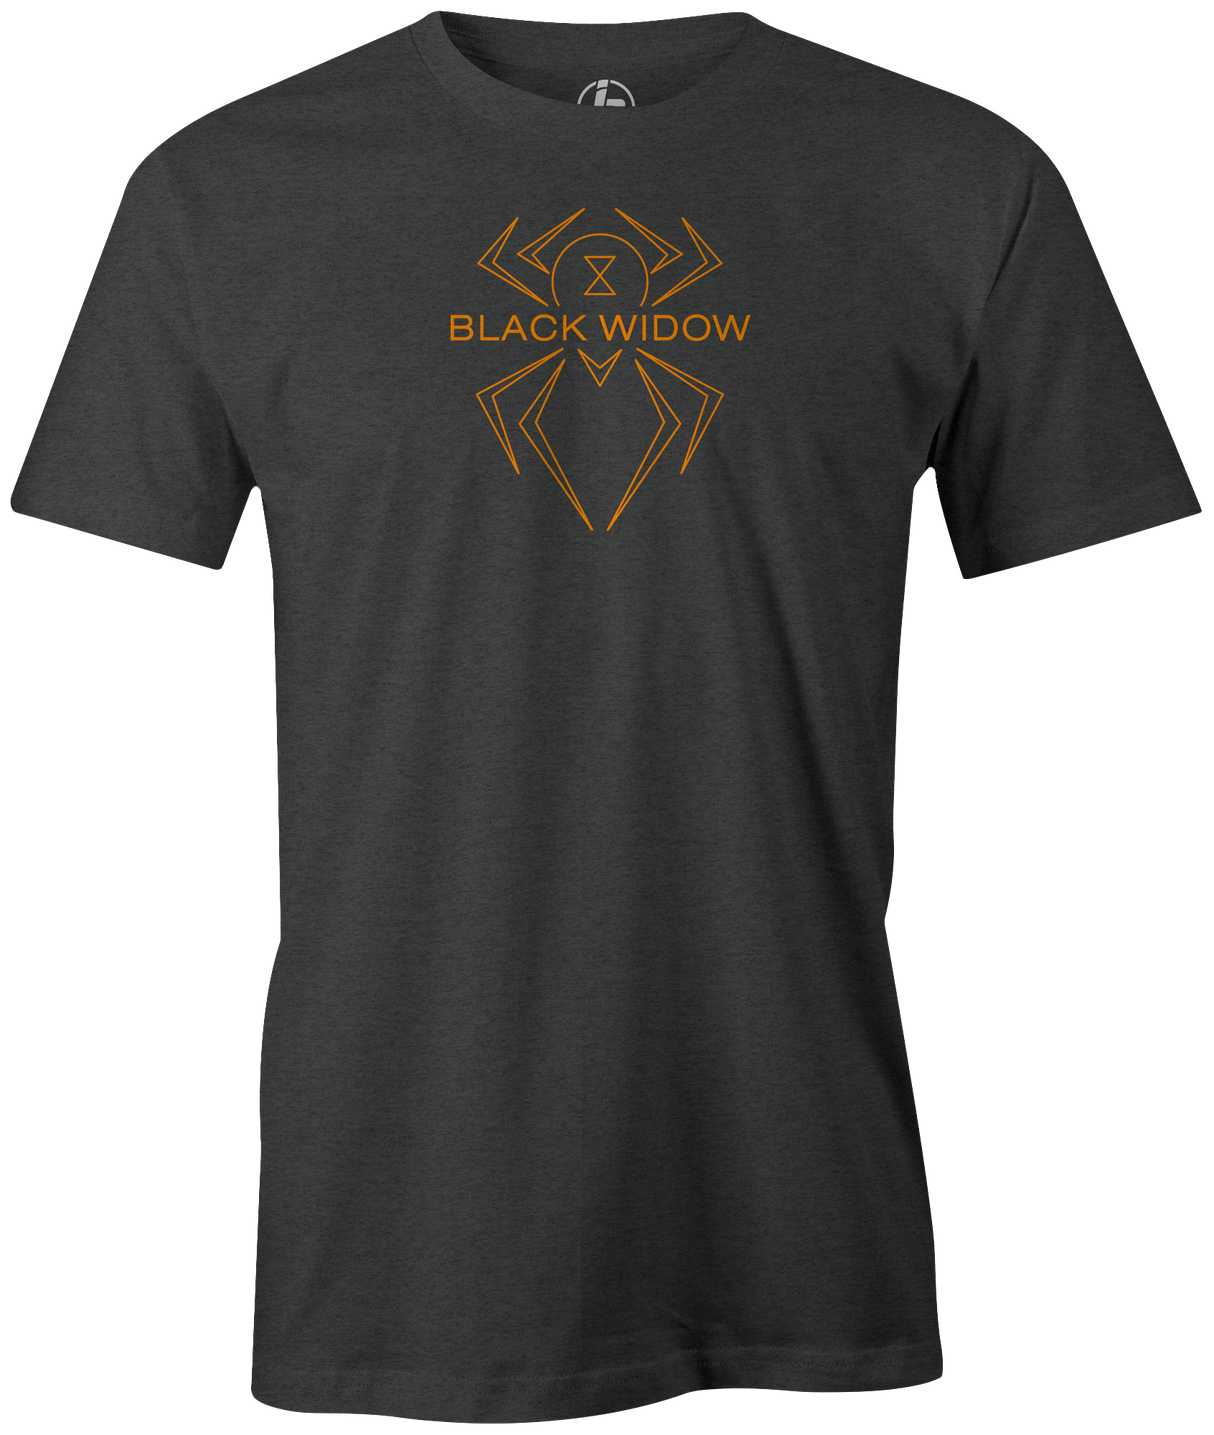 The latest in Hammer Bowling's Black Widow Series, the new Black Widow 3.0. It's Hammer Time! Wear this iconic logo with pride. Grab this classic Hammer t-shirt and hit the lanes! This is the perfect gift for all Hammer fans! Bill o'neill, Tshirt, tee, tee-shirt, tee shirt, Pro shop. League bowling team shirt. PBA. PWBA. USBC. Junior Gold. Youth bowling. Tournament t-shirt. Men's. Bowling Ball.